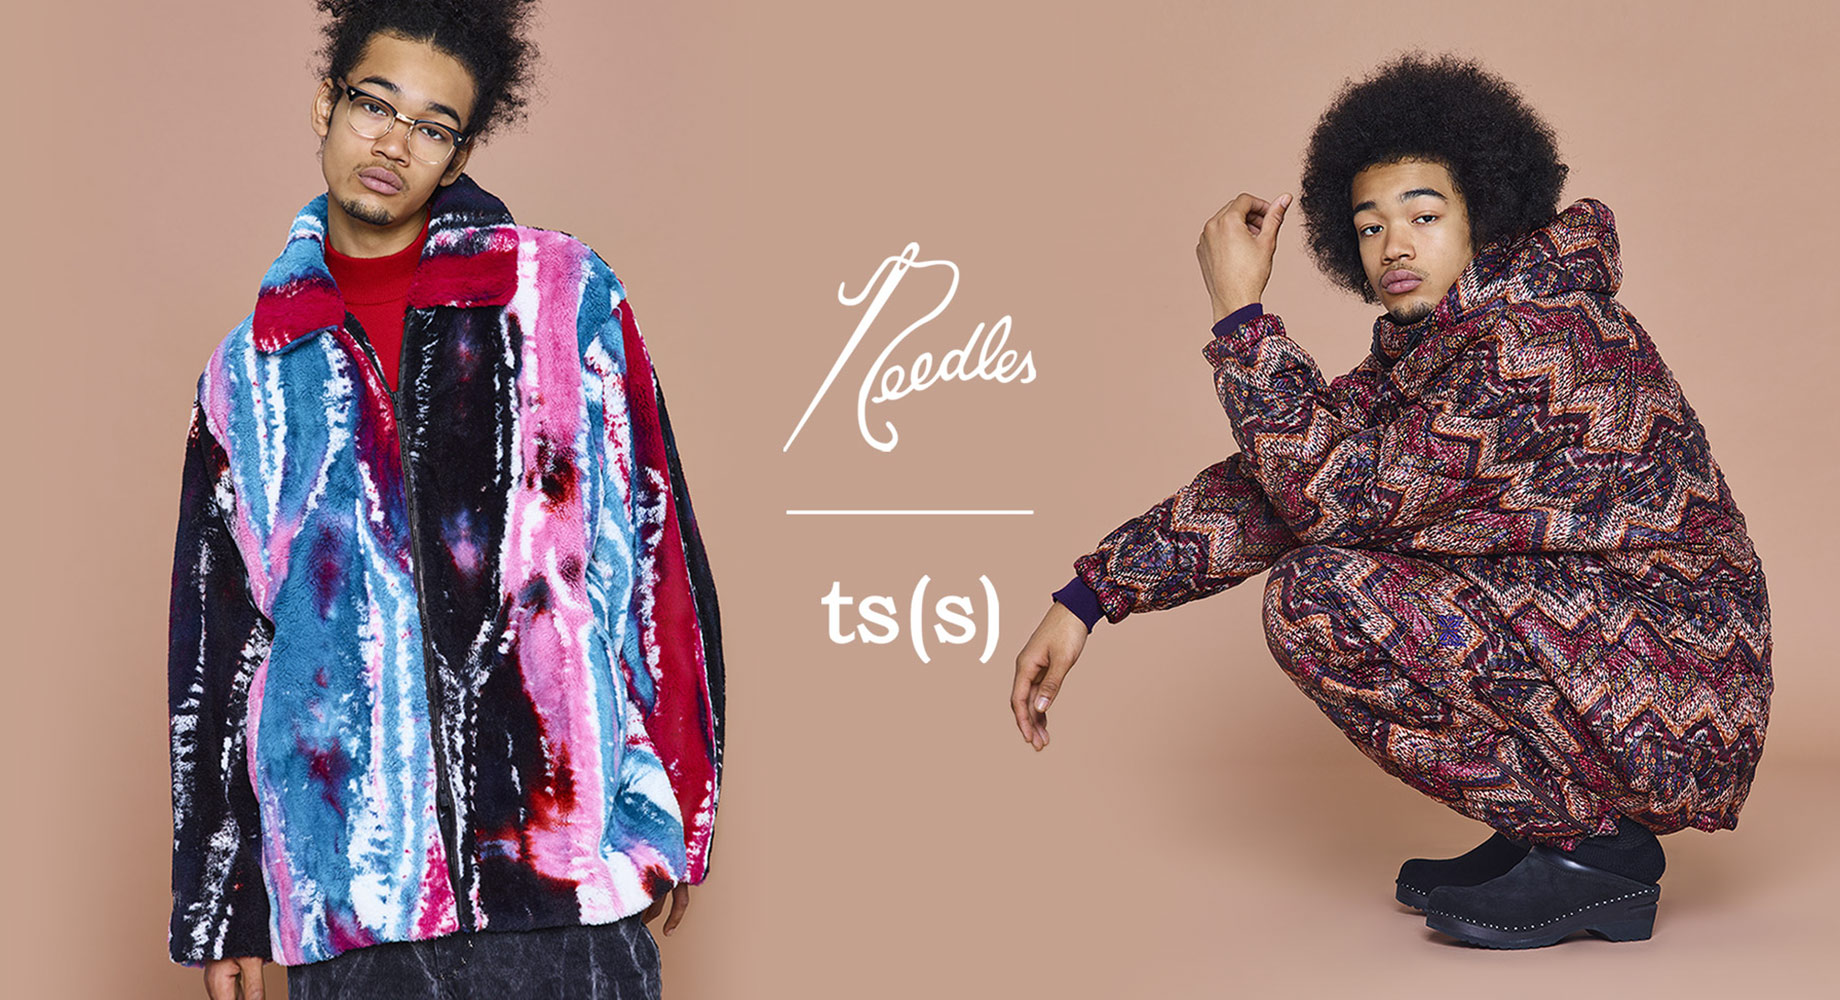 〈NEEDLES〉x〈ts(s)〉COLLABORATION PRODUCTS for NEPENTHES 11.5（SAT）11:00 JST - ON SALE